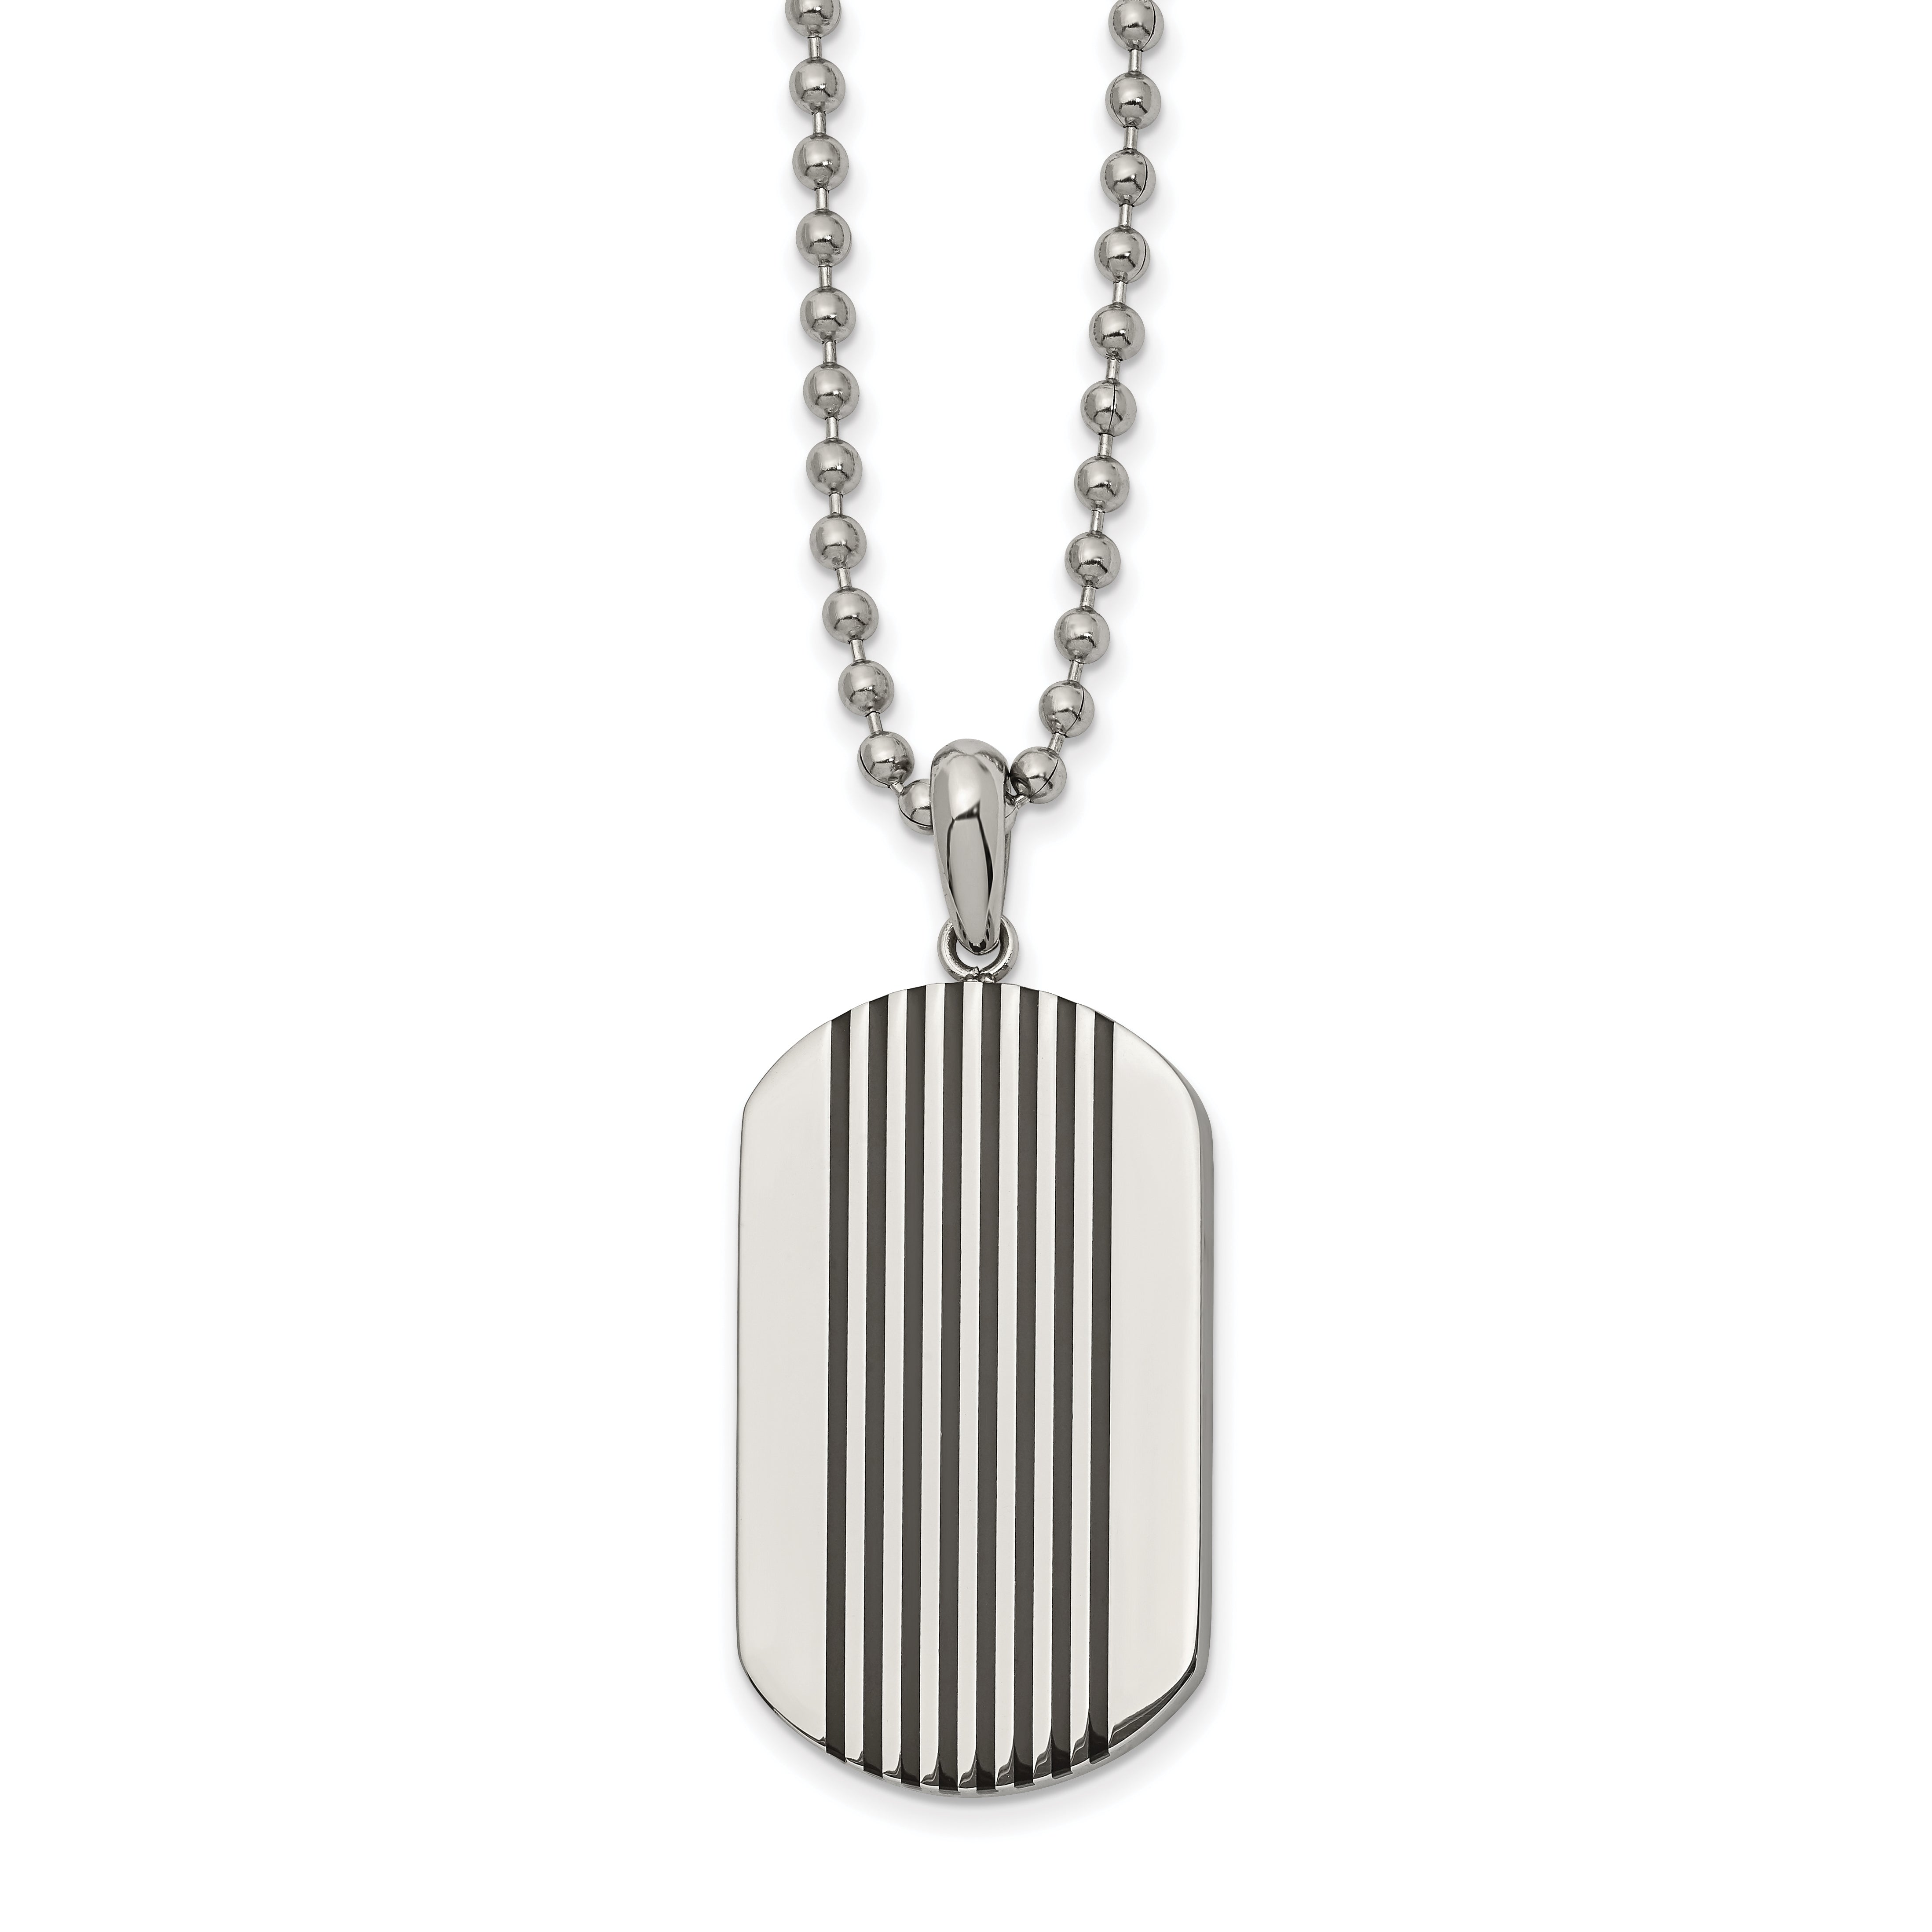 Chisel Stainless Steel Polished with Black Enamel Stripes Dog Tag on a 22 inch Ball Chain Necklace